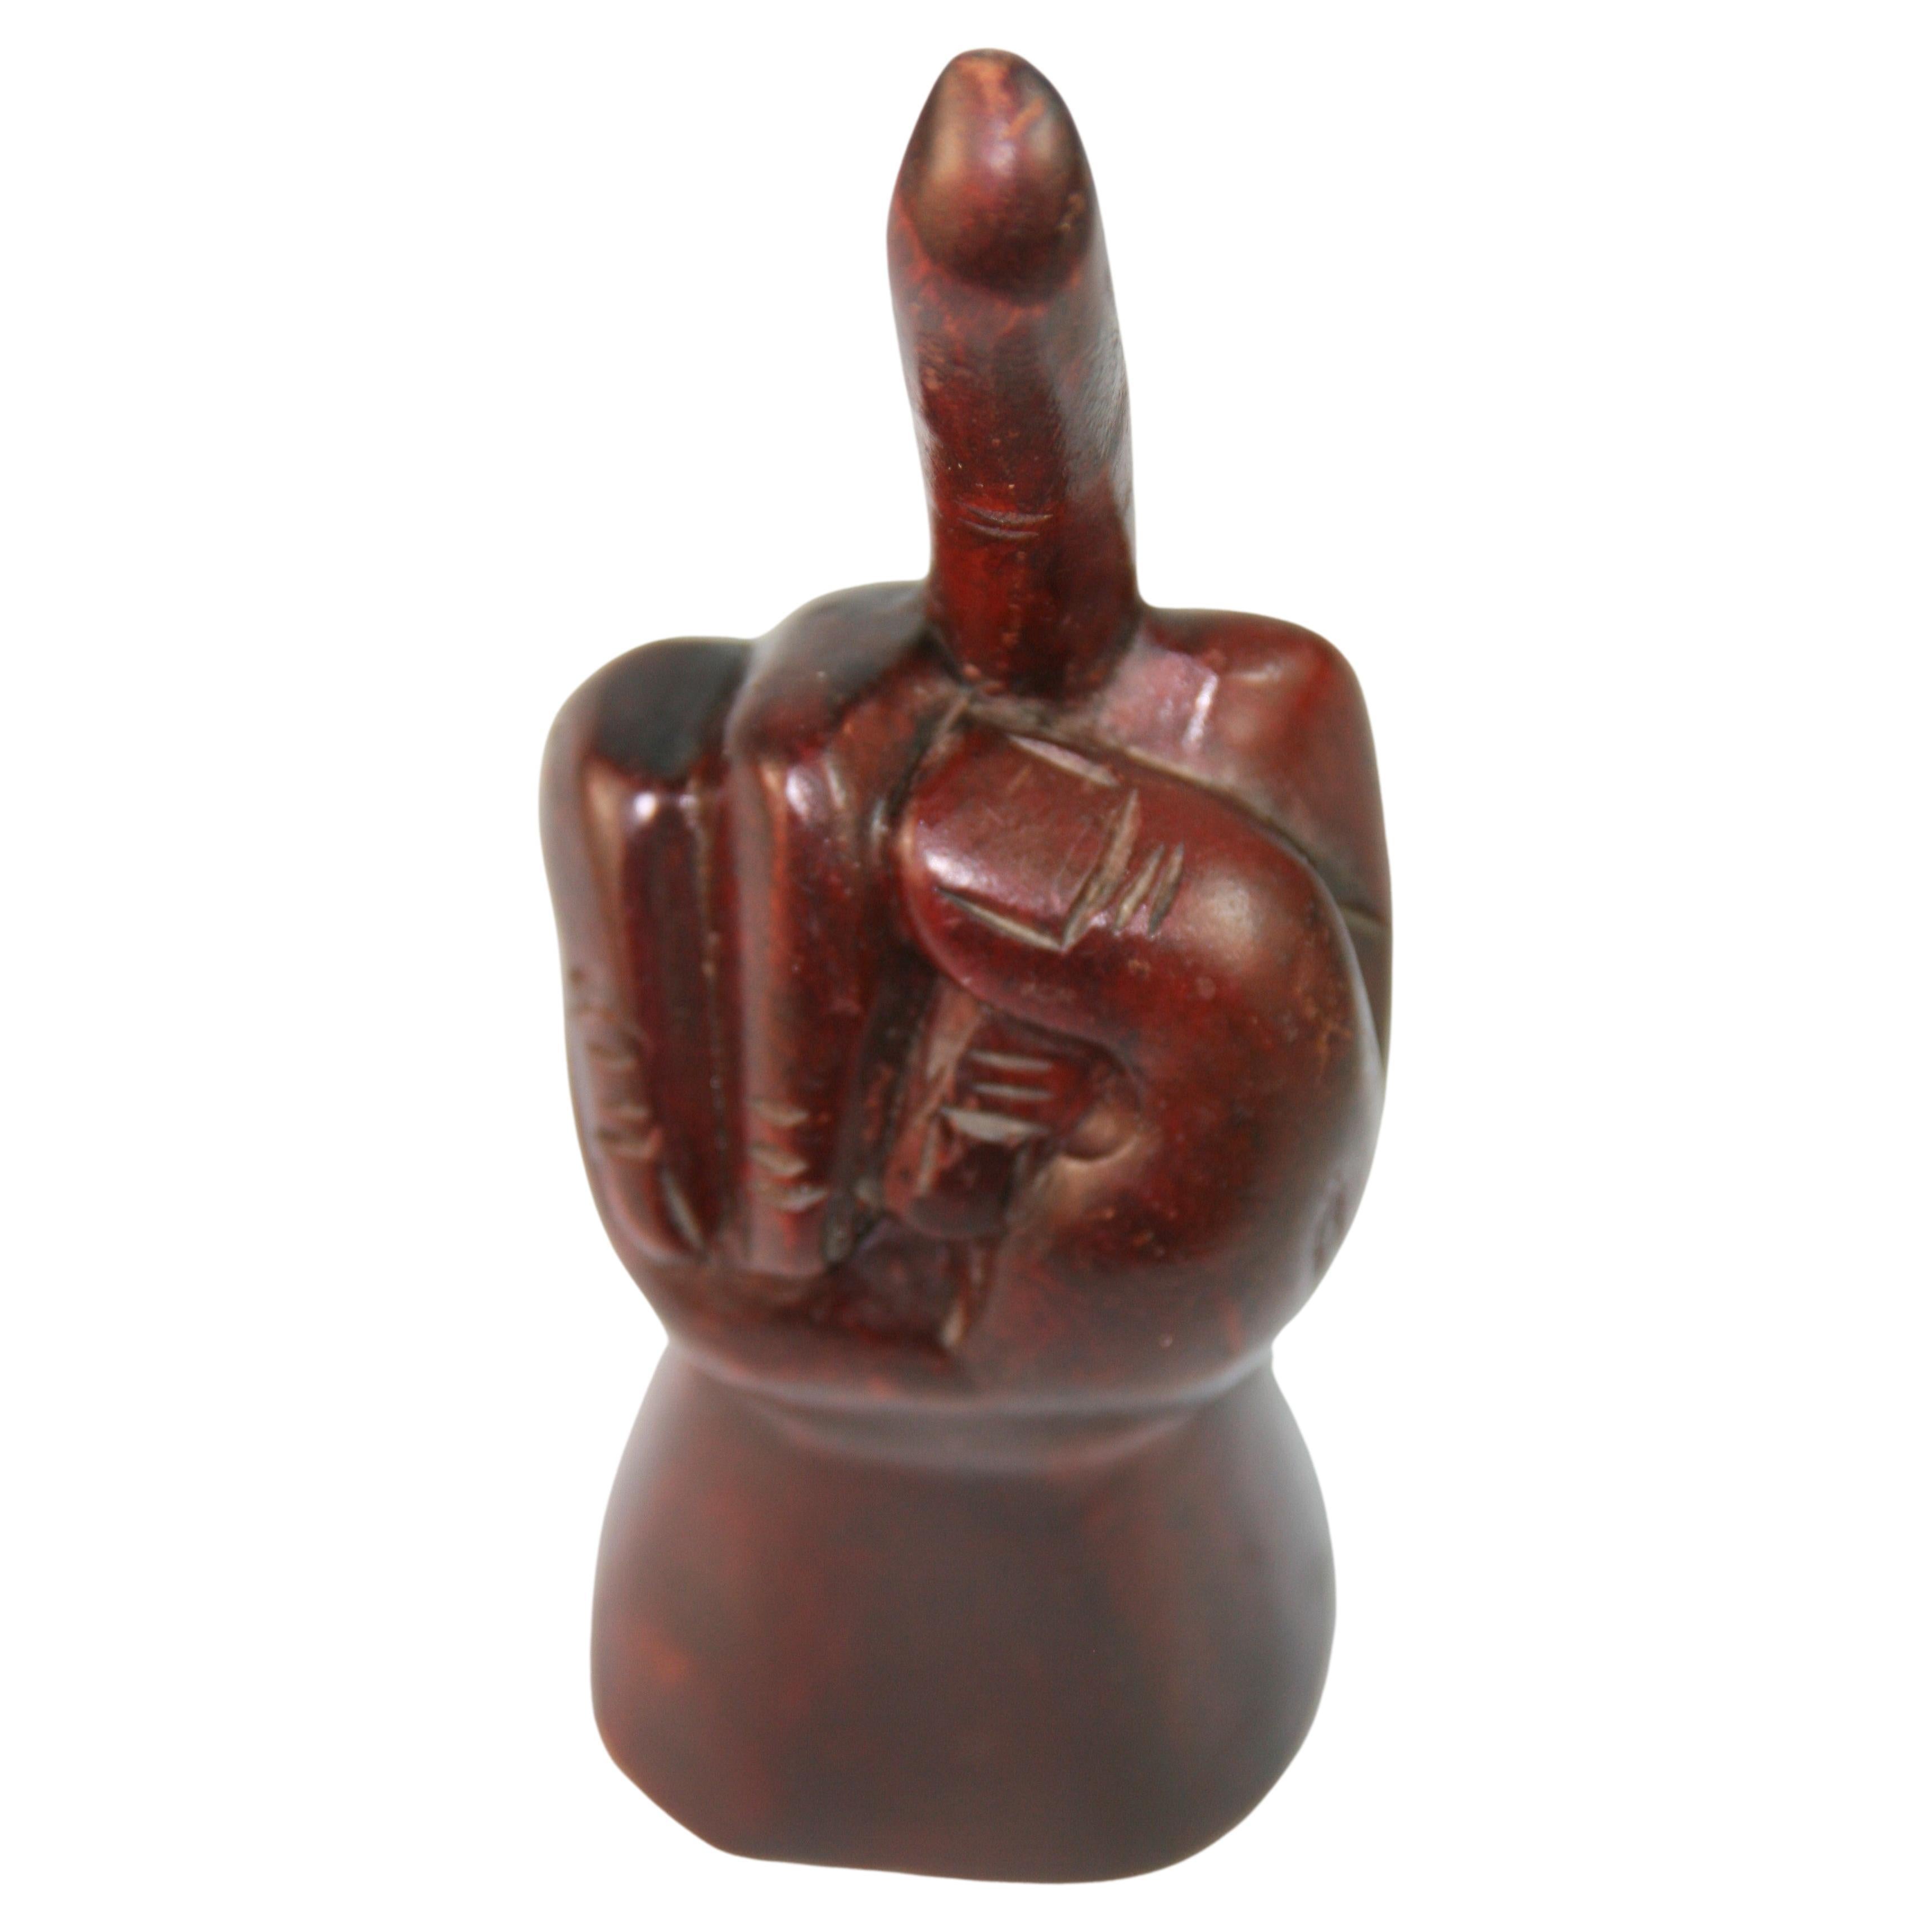 Neapolitan Italian Carved Wood Sculpture "The Finger" 1960's